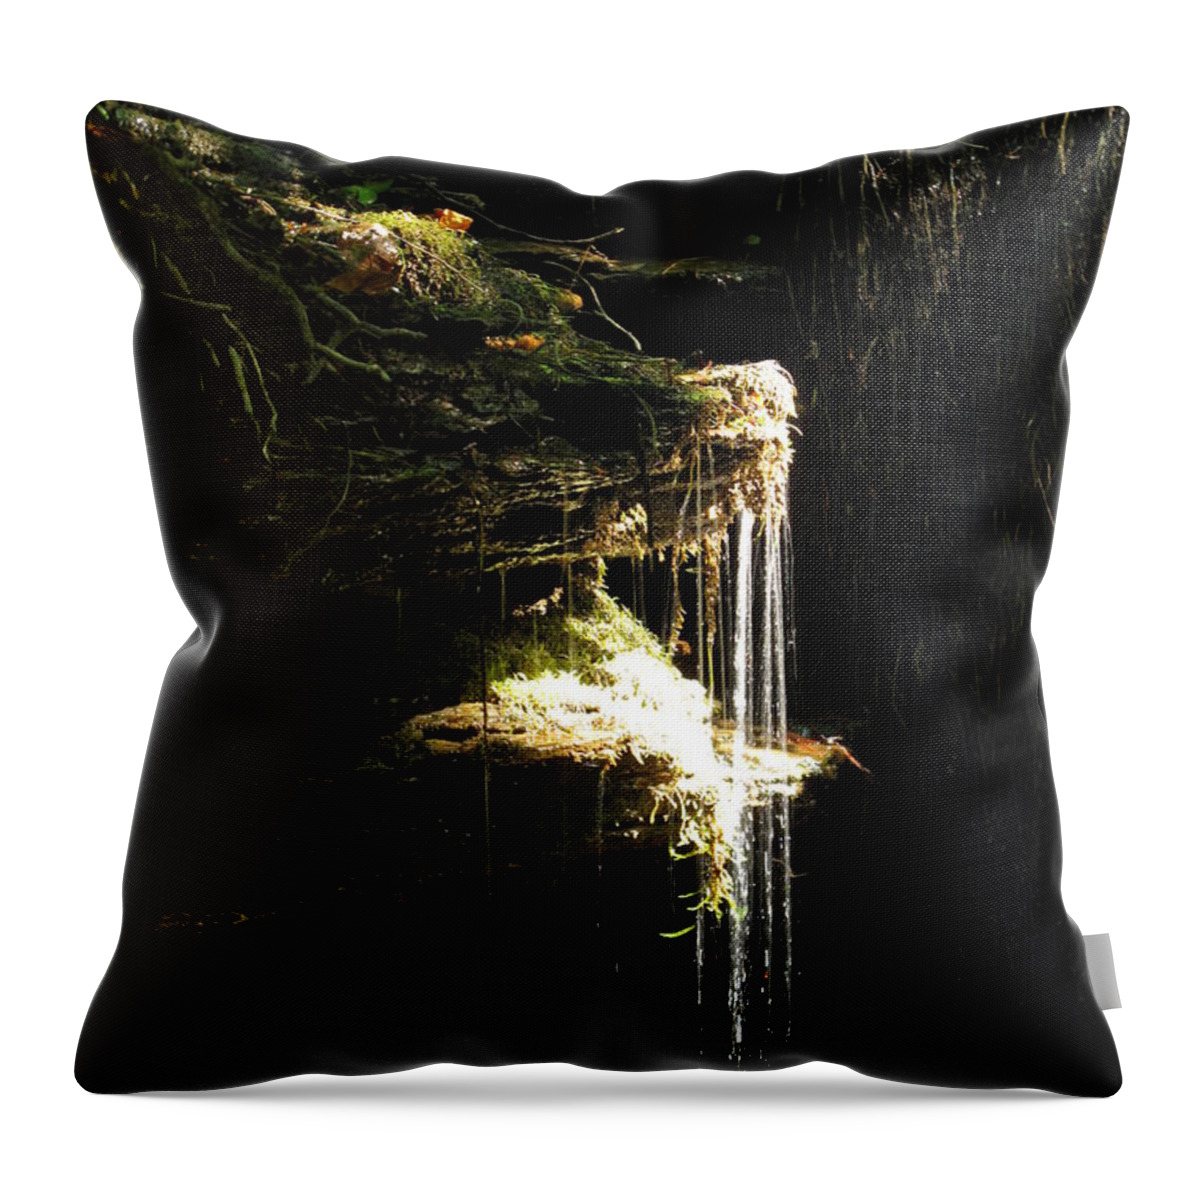 Sunlit Throw Pillow featuring the photograph Sunlit Falls by Stacie Siemsen